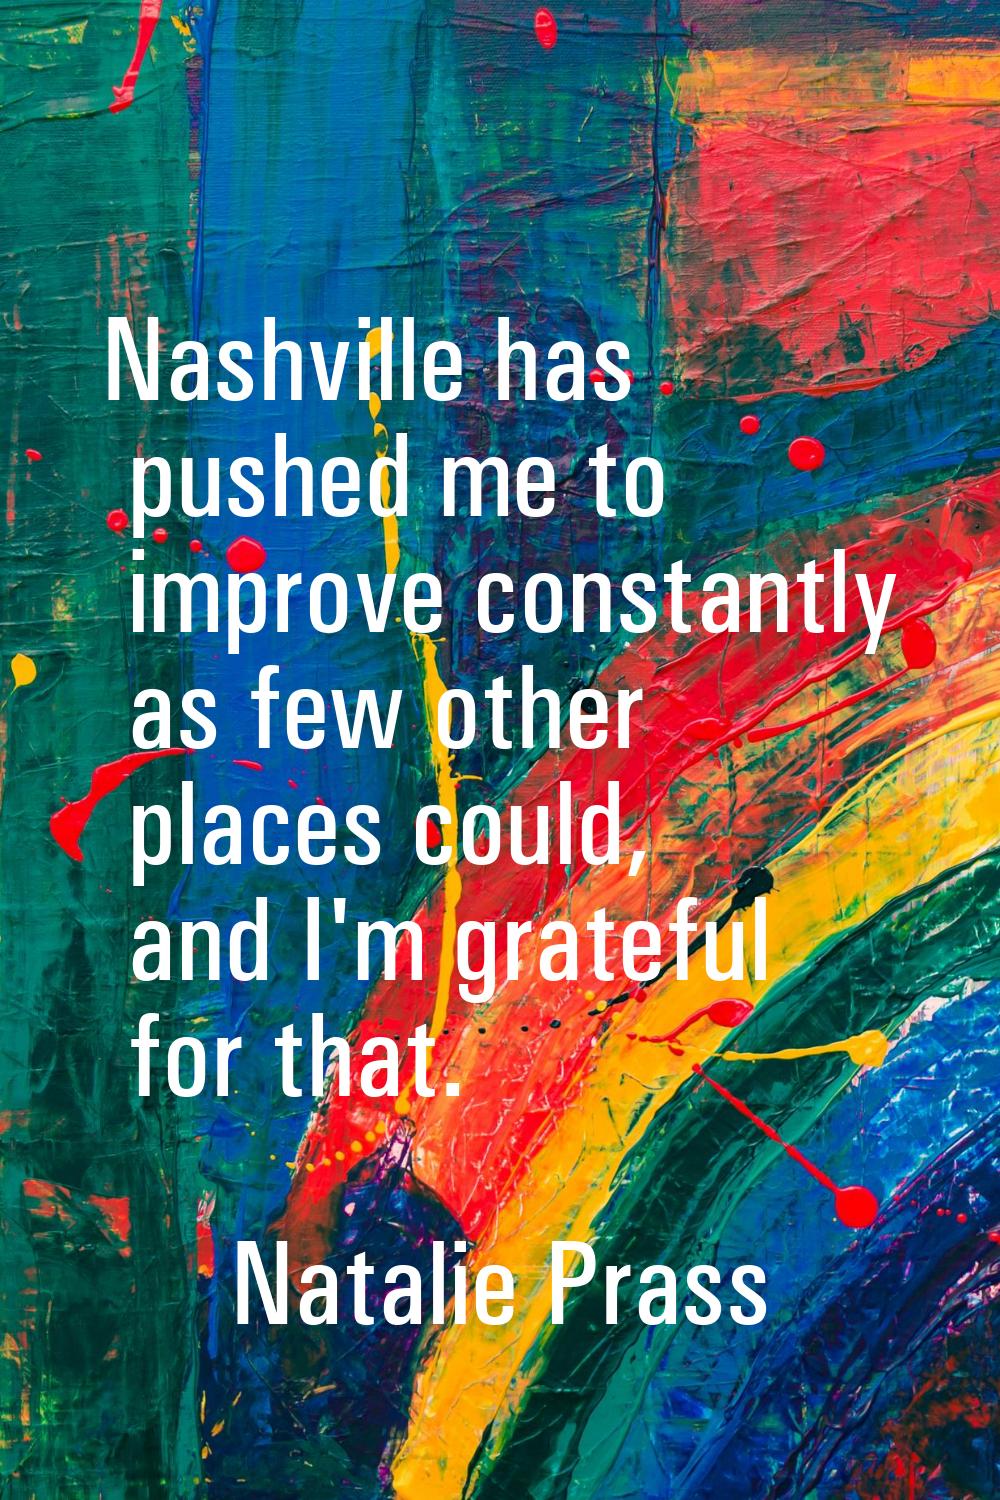 Nashville has pushed me to improve constantly as few other places could, and I'm grateful for that.